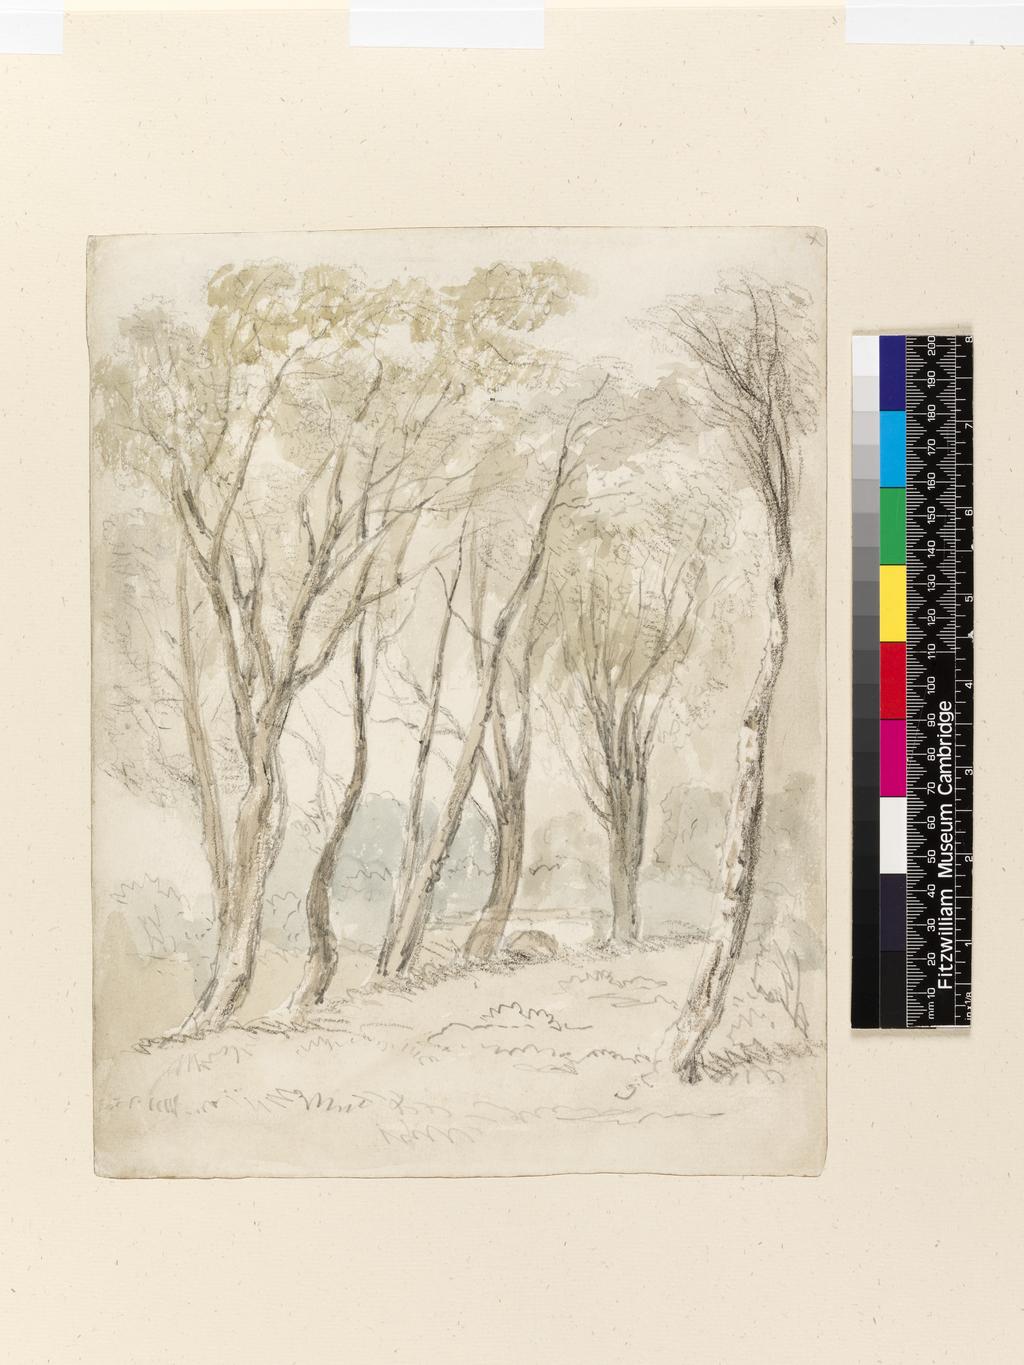 An image of A study of trees. Cox, David, the elder (British, 1783-1859). Chalk and watercolour on paper, 19th century. Batchelor Collection.